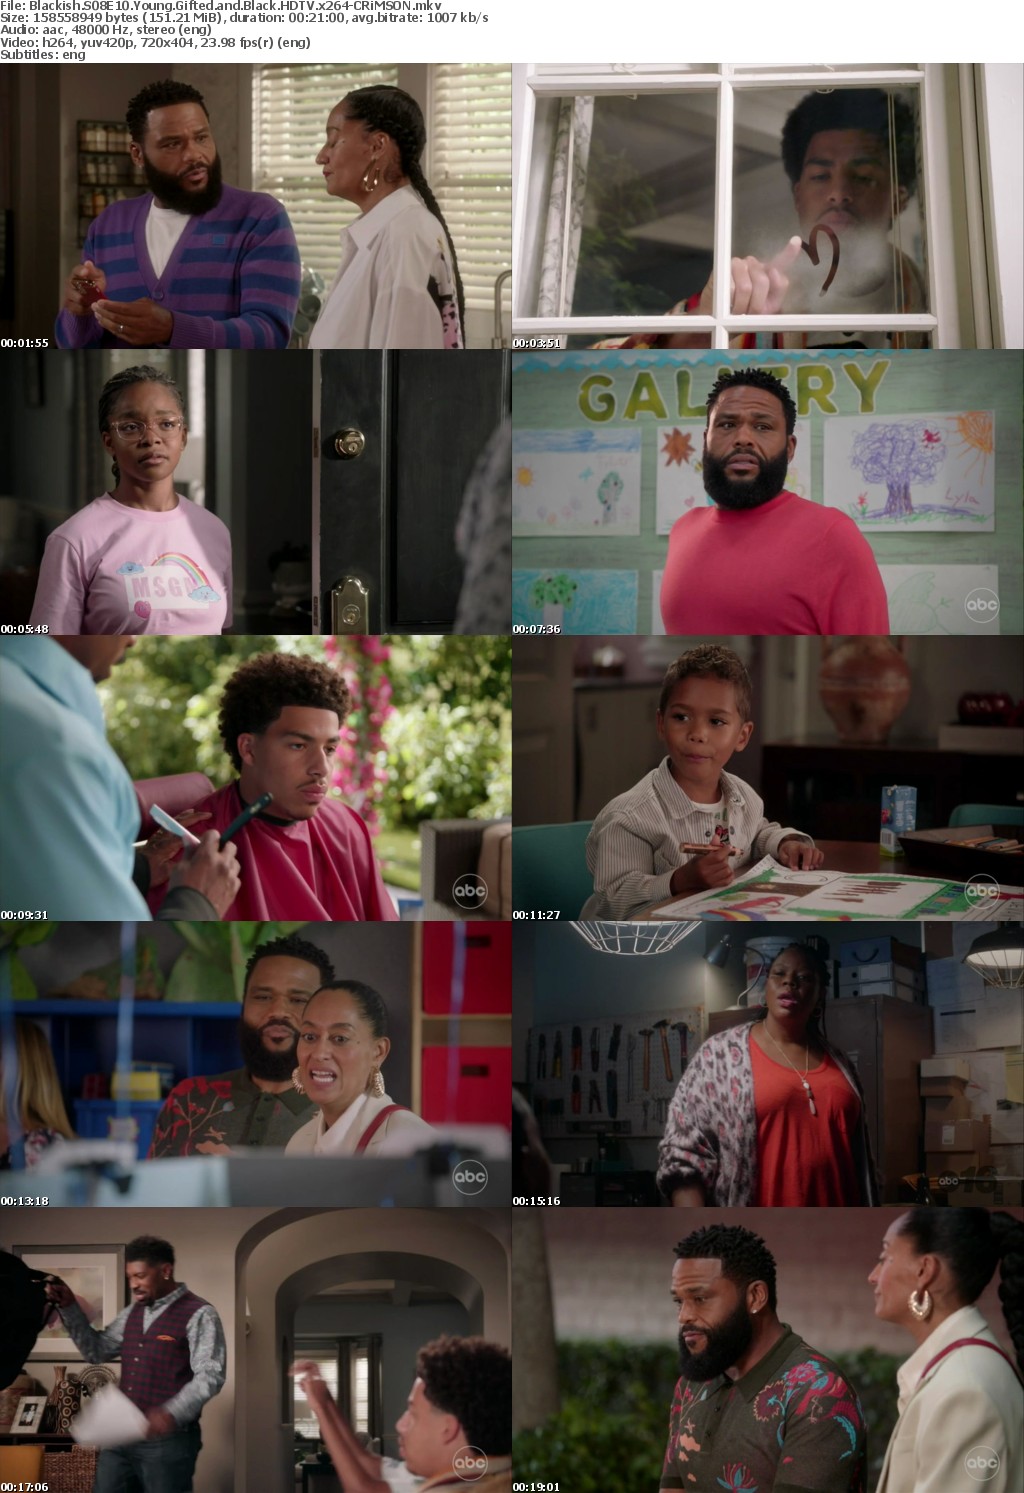 Blackish S08E10 Young Gifted and Black HDTV x264-CRiMSON